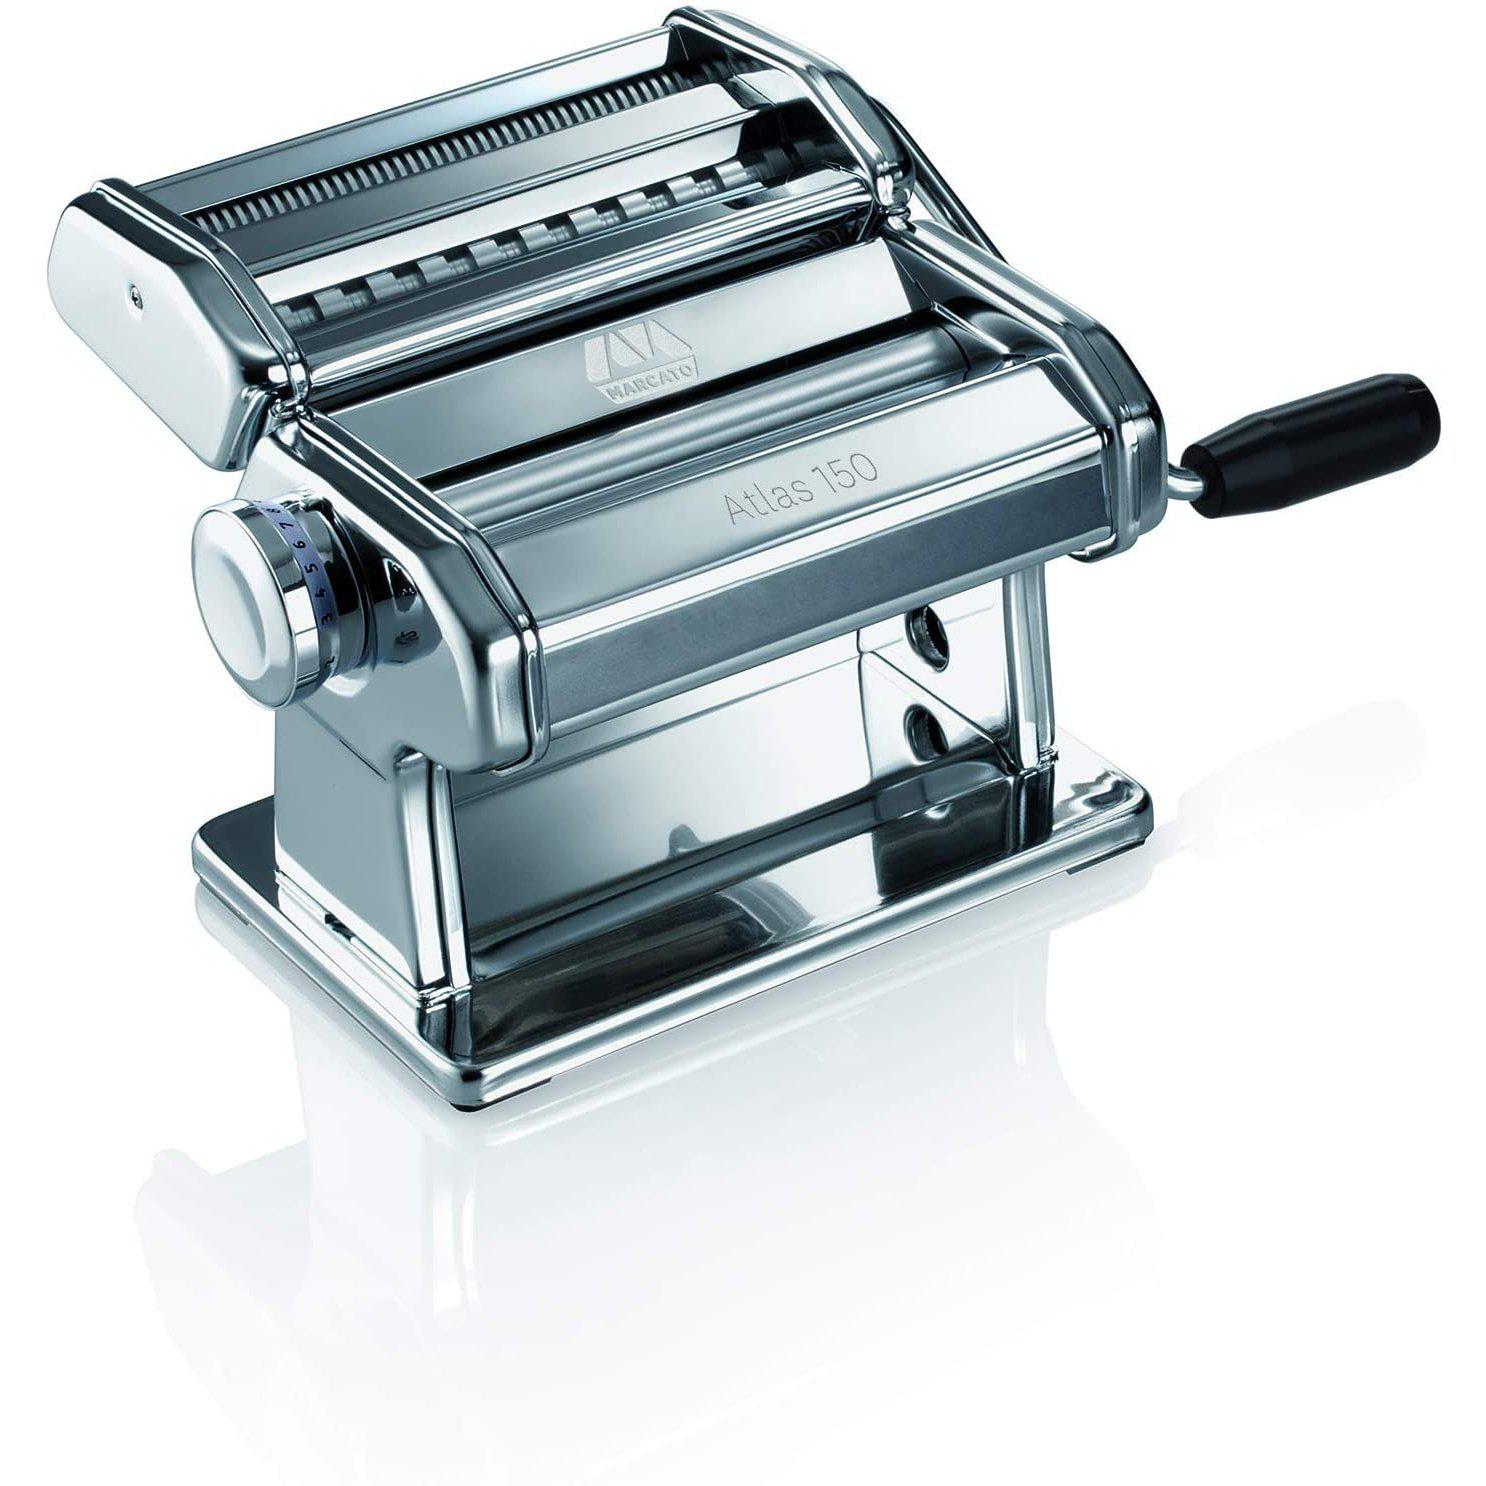 Marcato Atlas Pasta Maker 150mm /6" Made in Italy - Includes Table Clamp, Cutters, Instructions